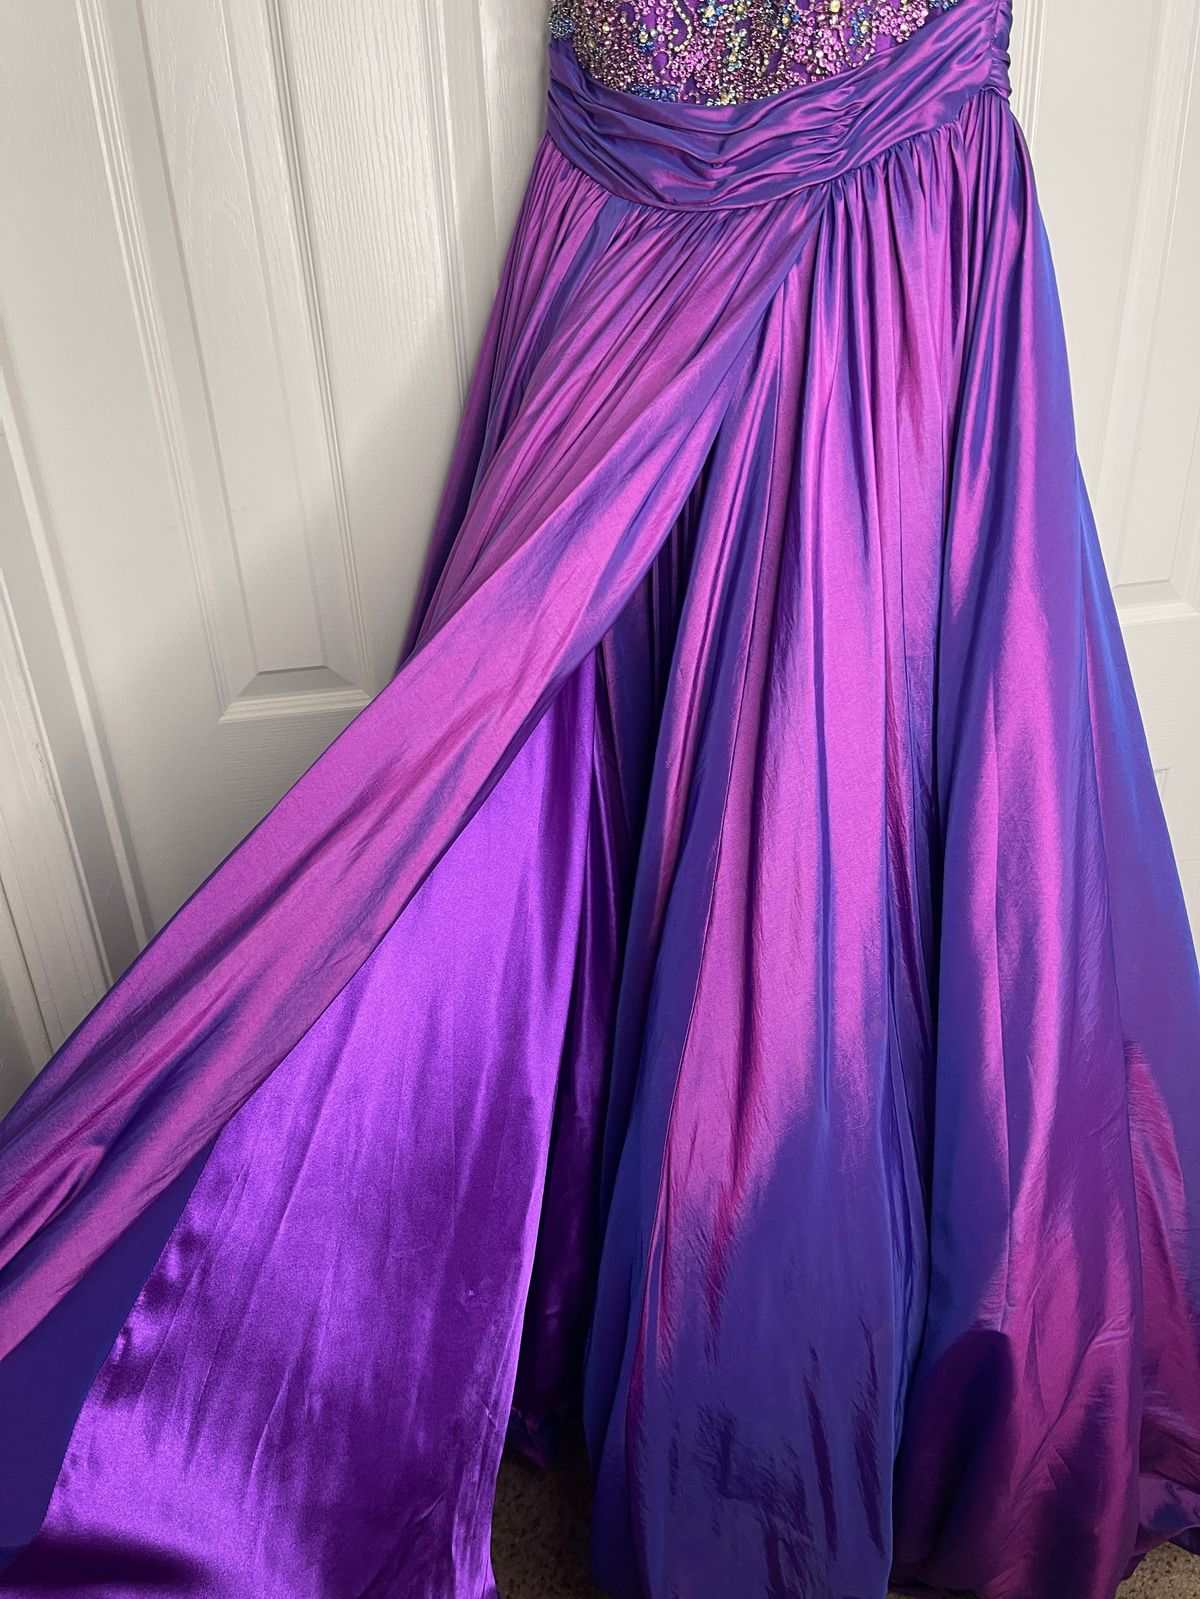 Style 50000 Rachel Allan Size 12 Prom Strapless Sequined Purple Ball Gown on Queenly